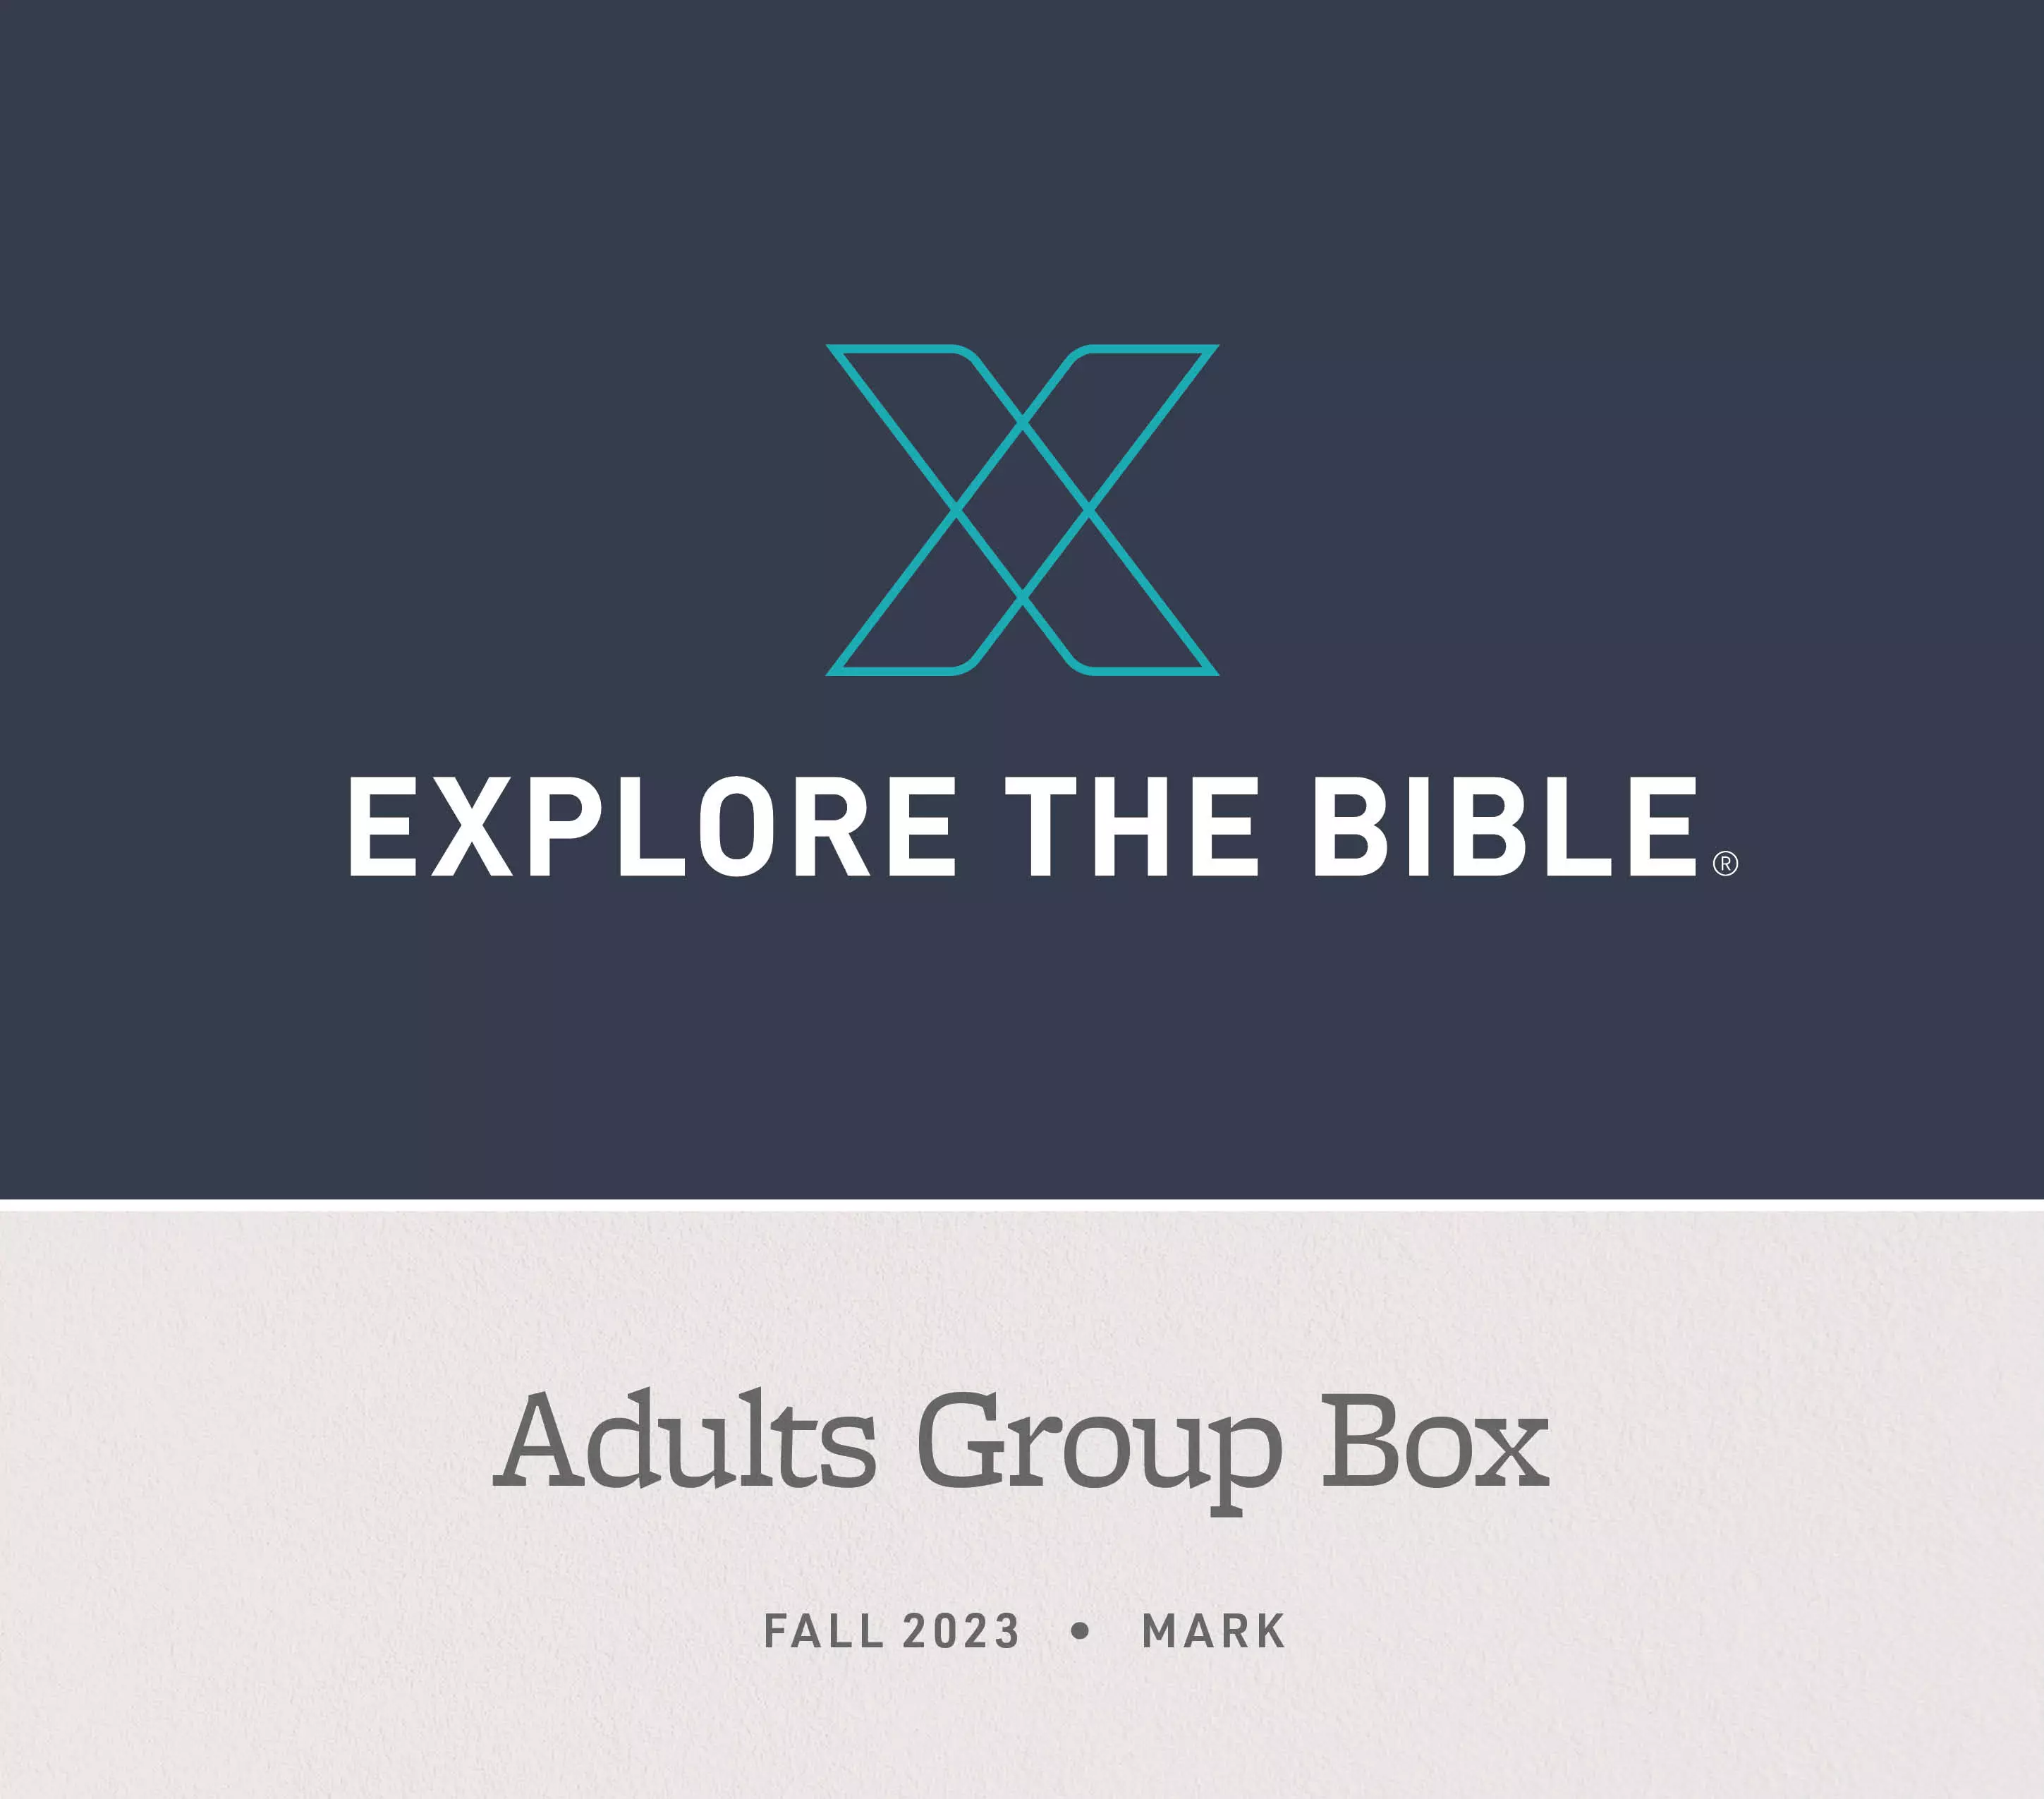 Explore the Bible: Adult Group Box - Fall 2023